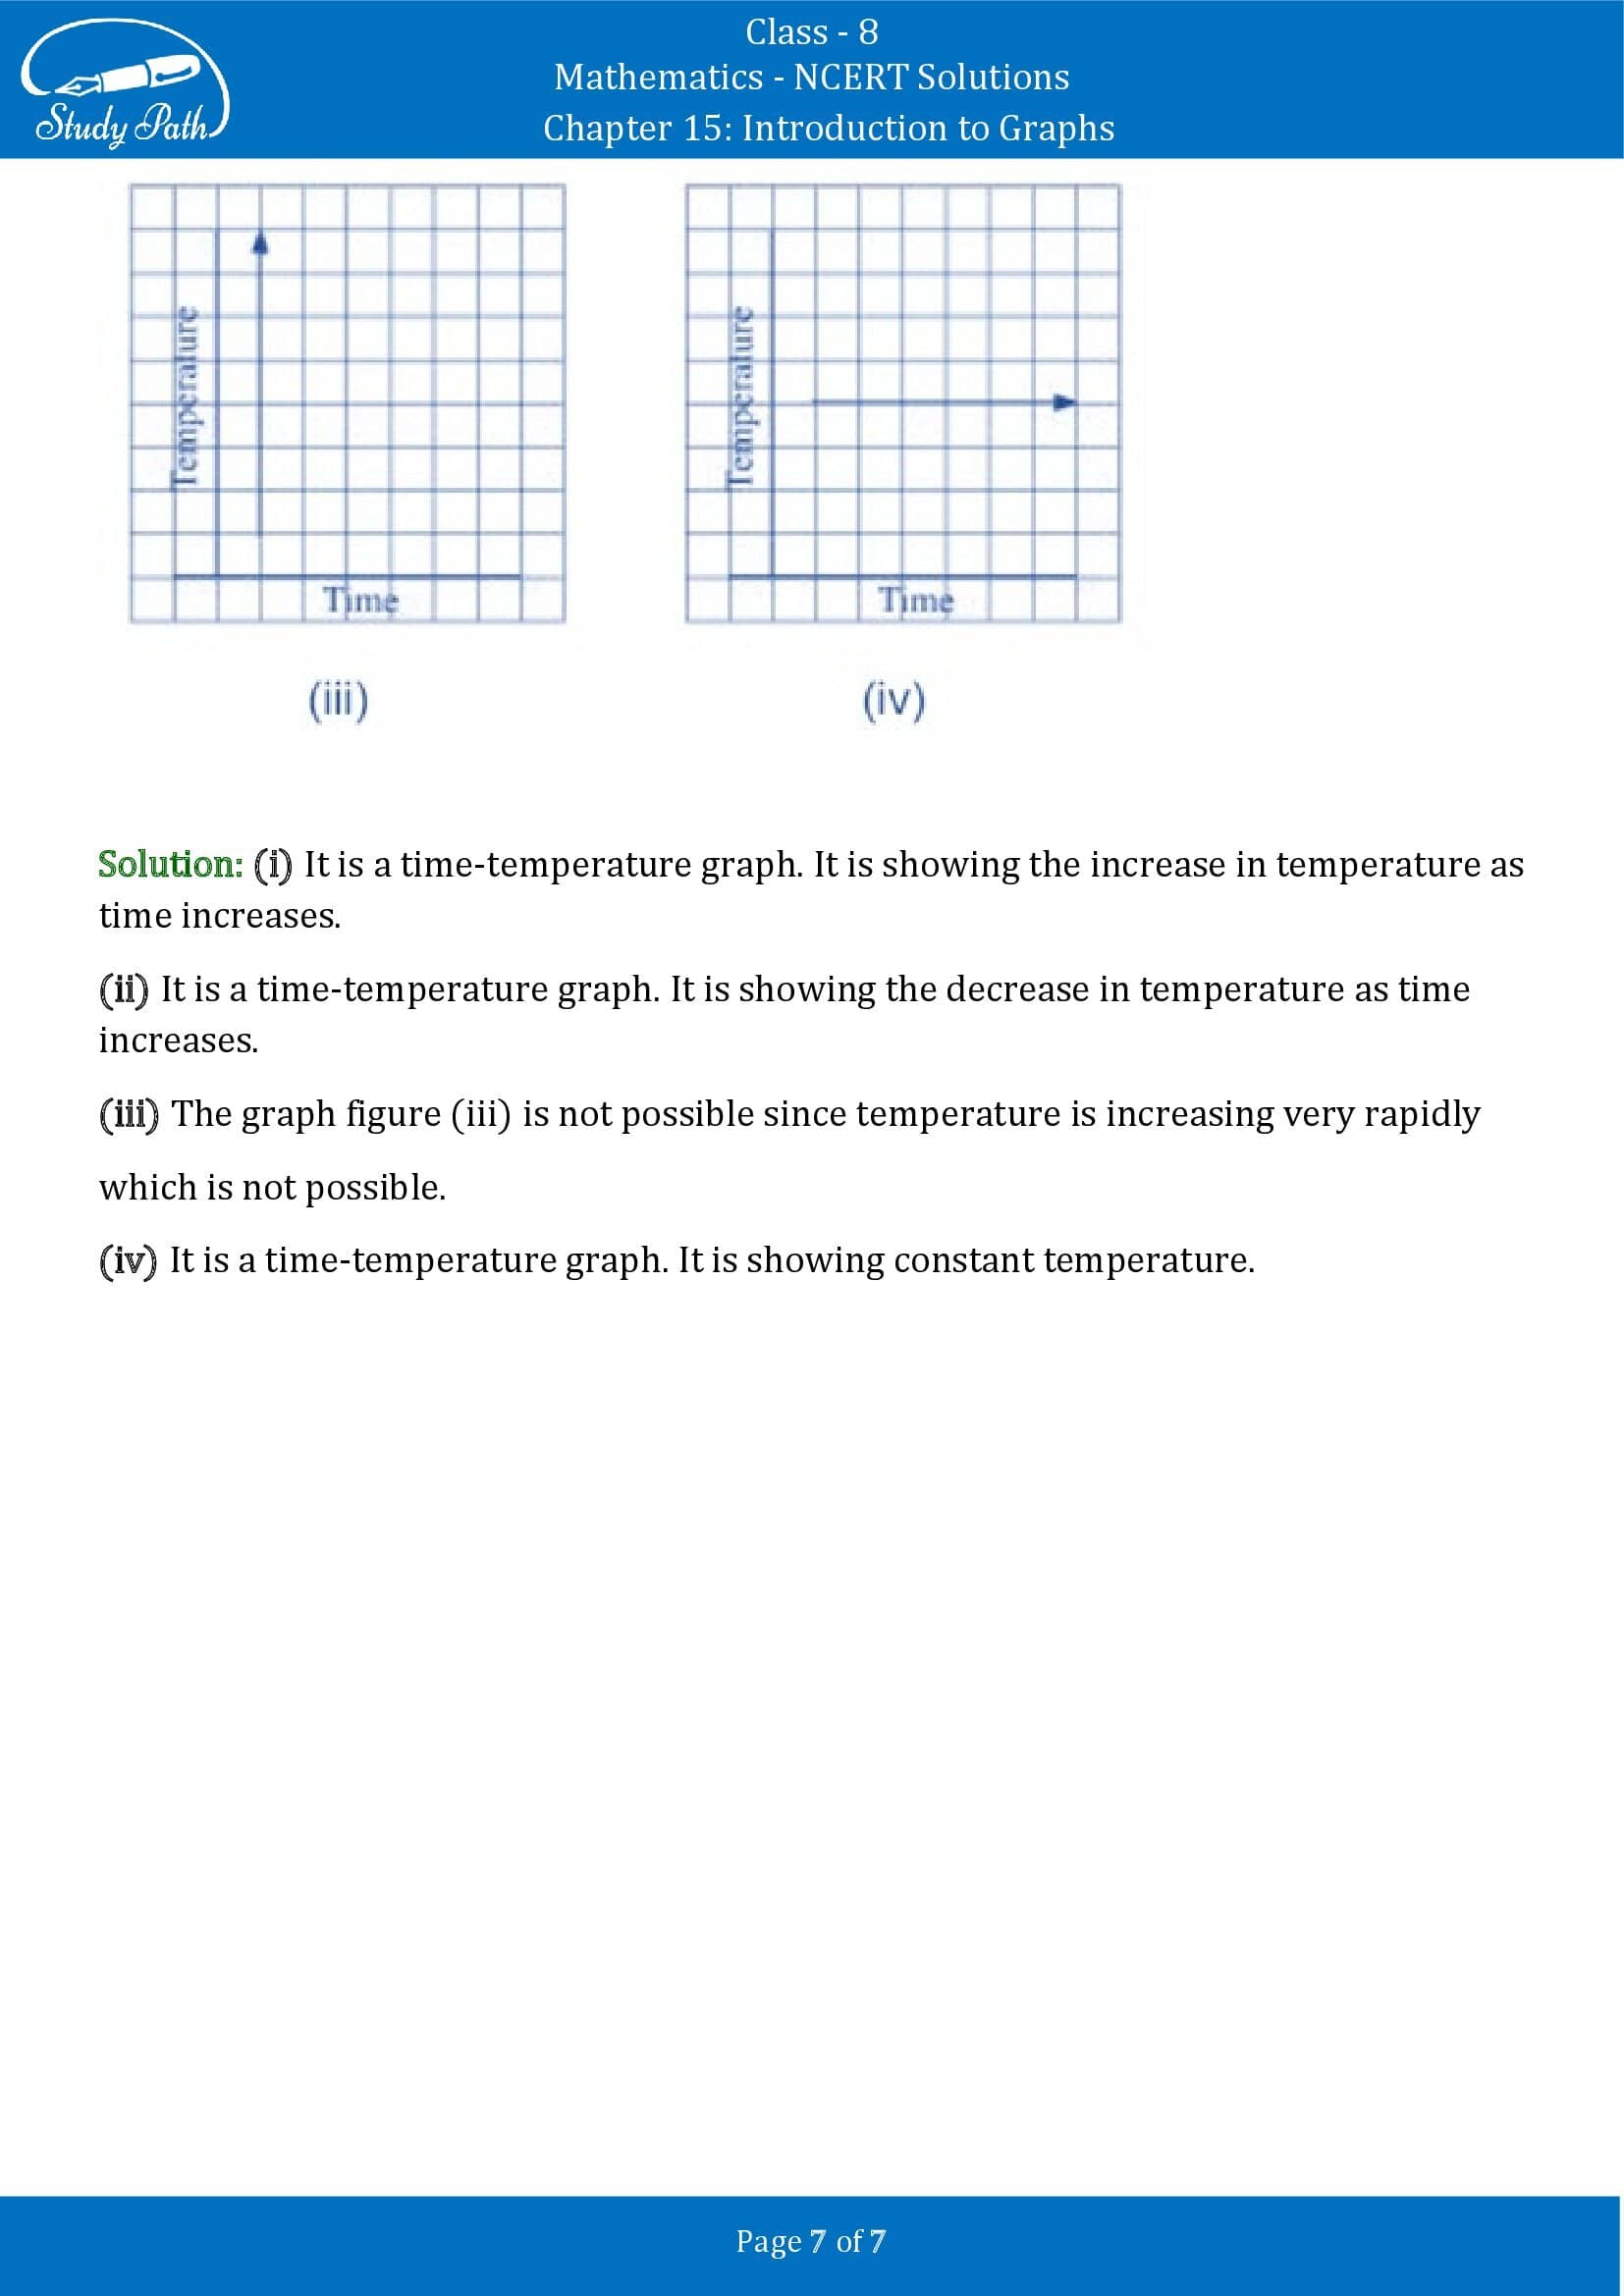 NCERT Solutions for Class 8 Maths Chapter 15 Introduction to Graphs Exercise 15.1 00007